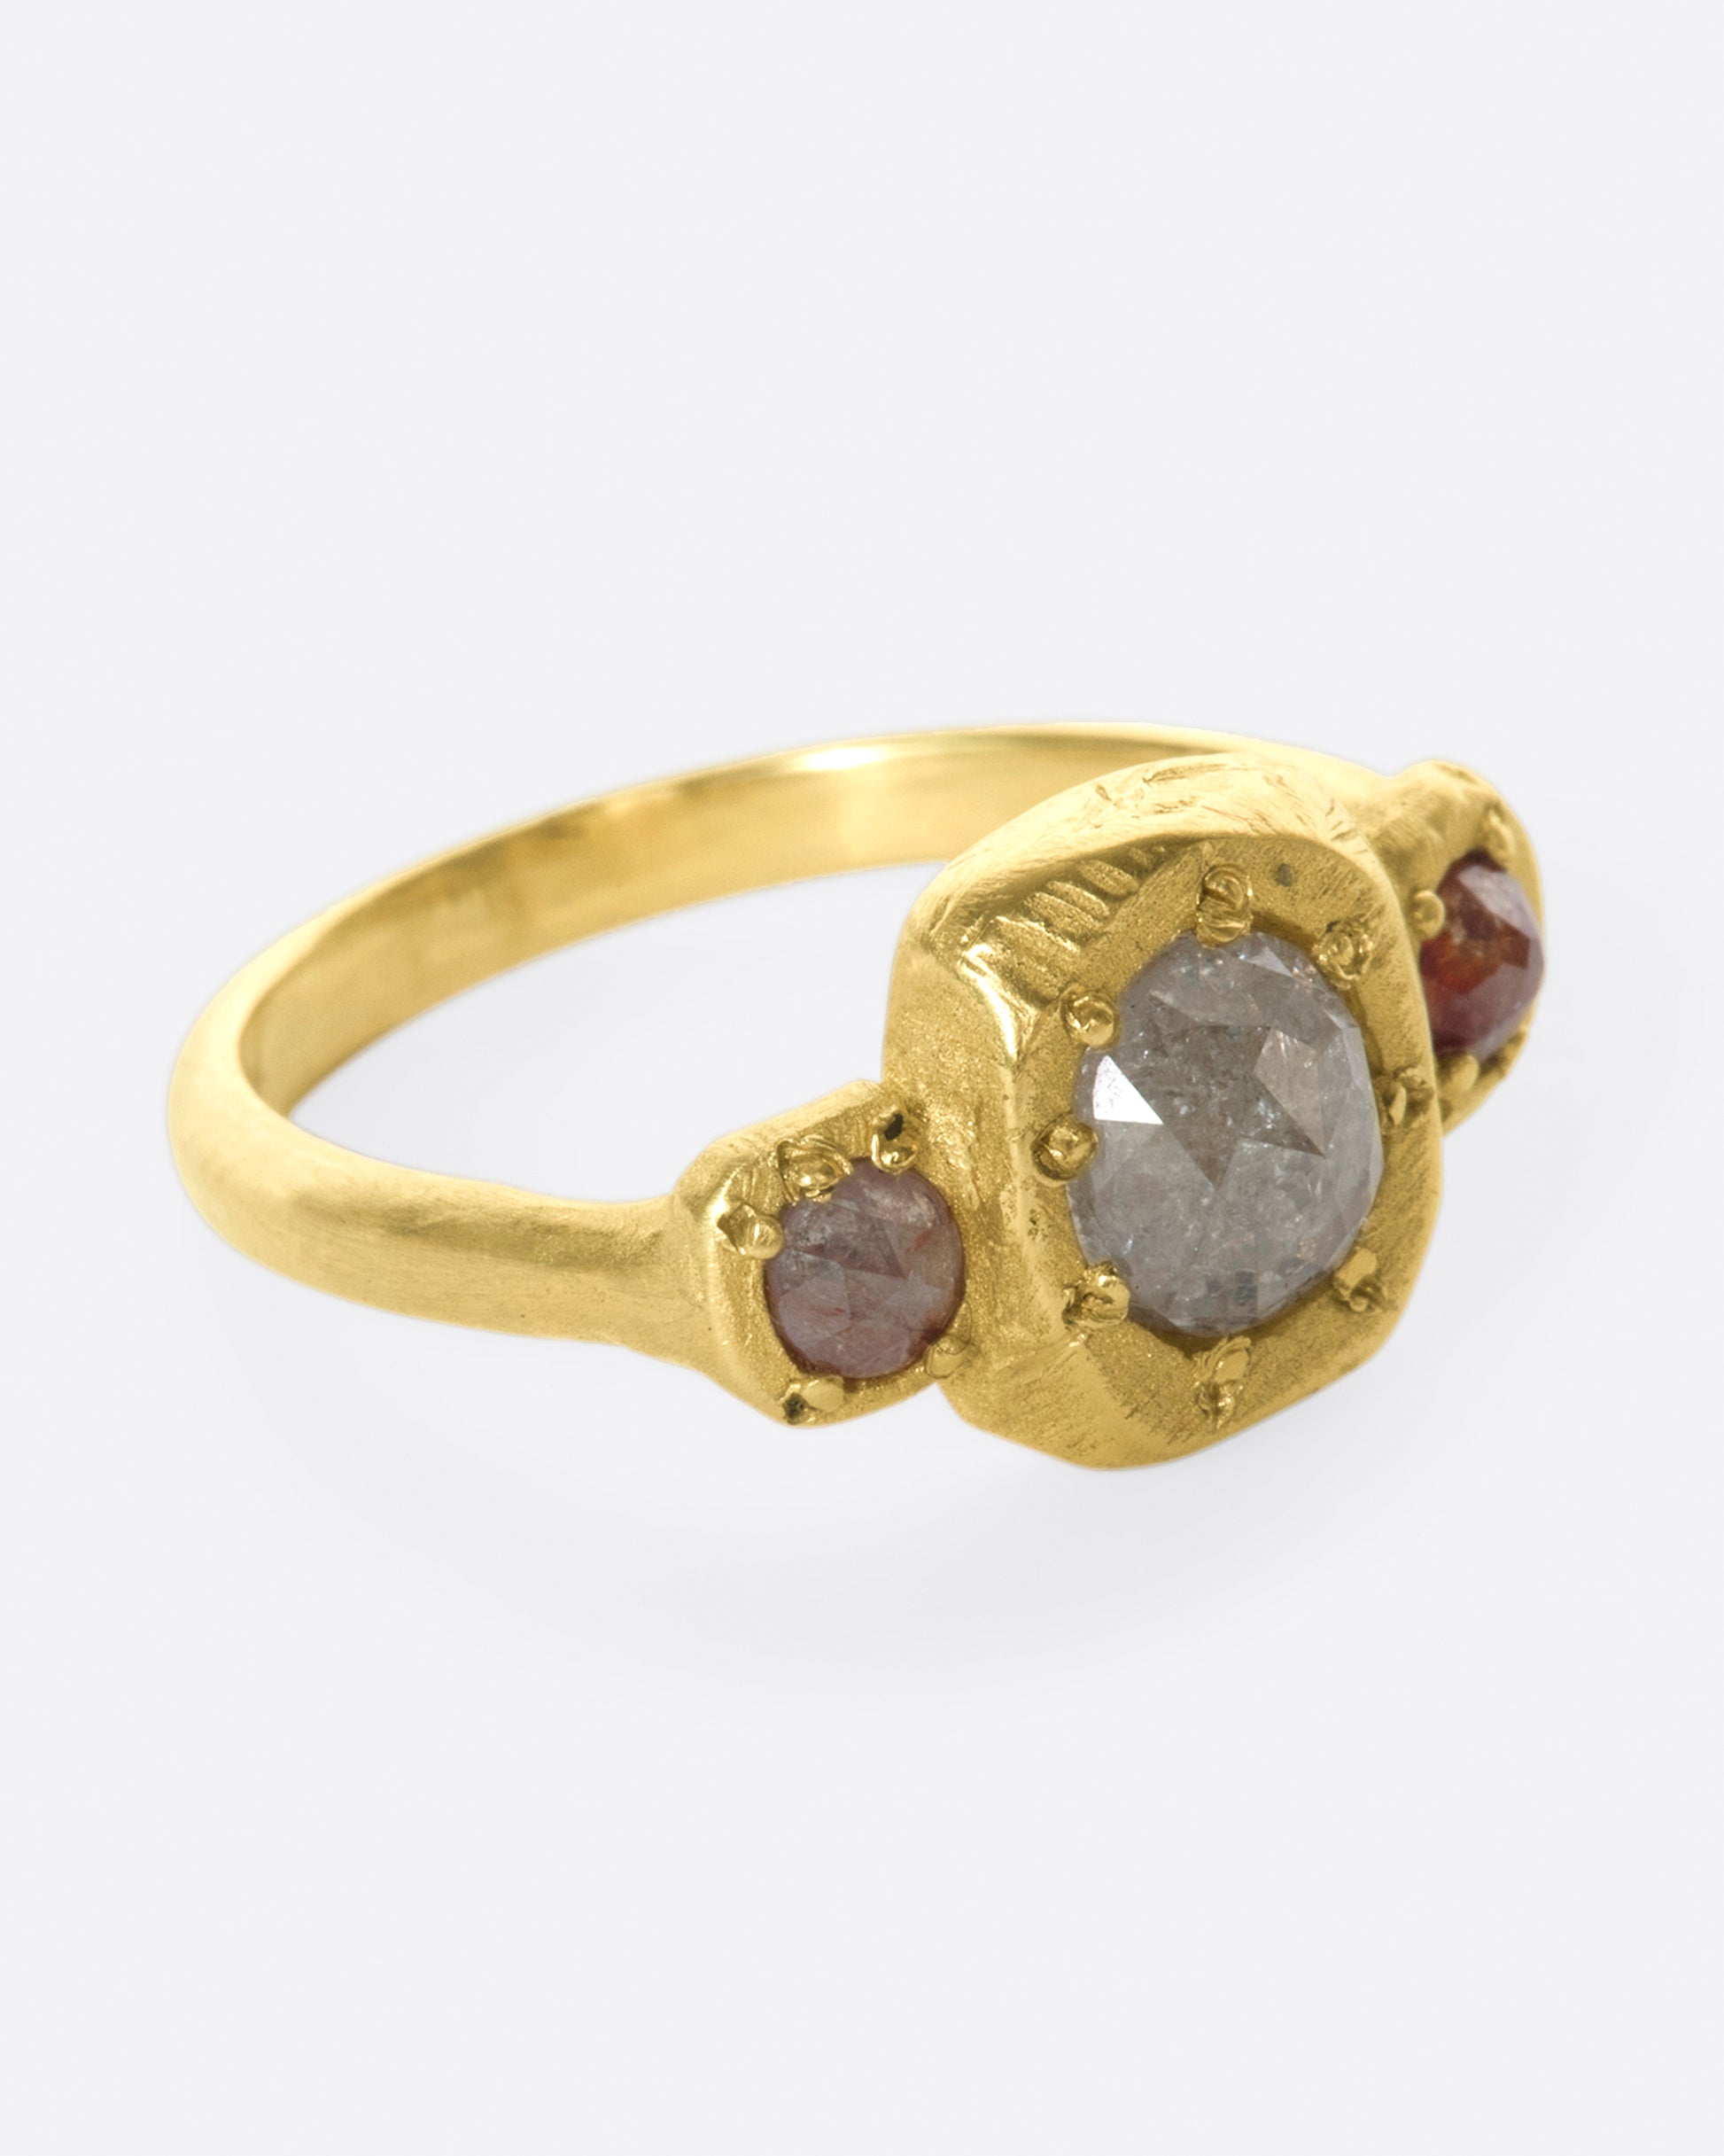 A one of a kind, organic take on a traditional trio ring.